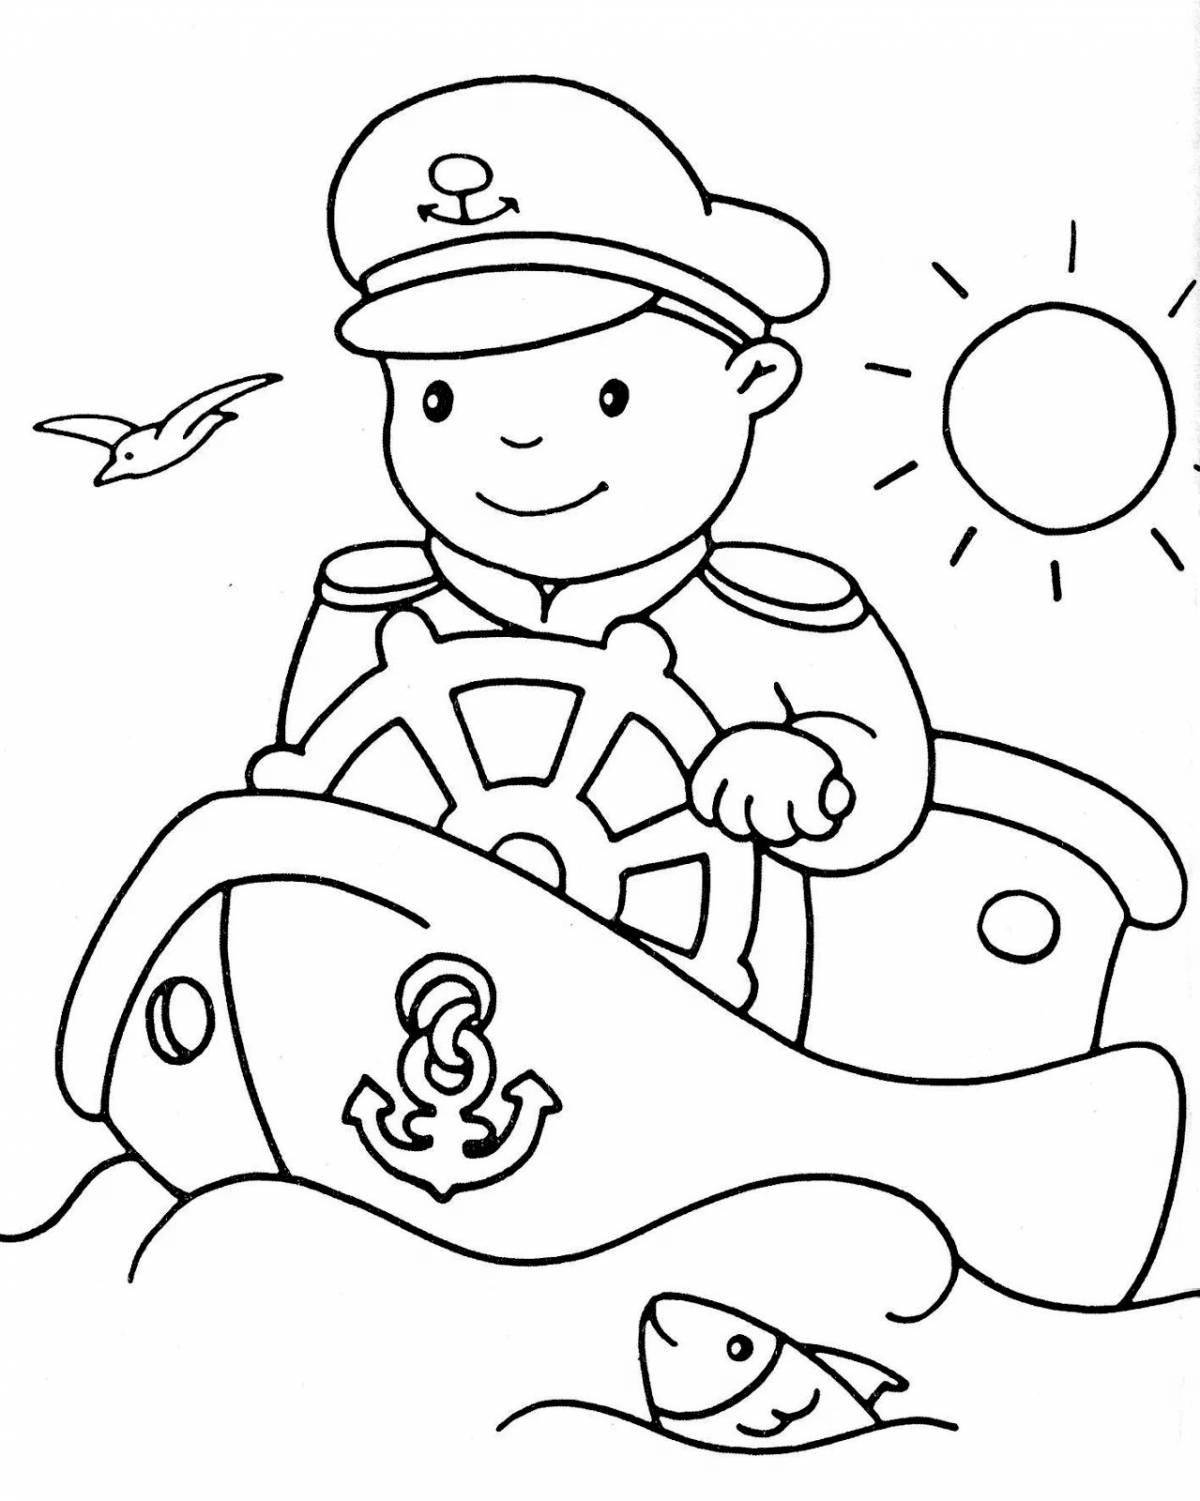 Amazing coloring page February 23